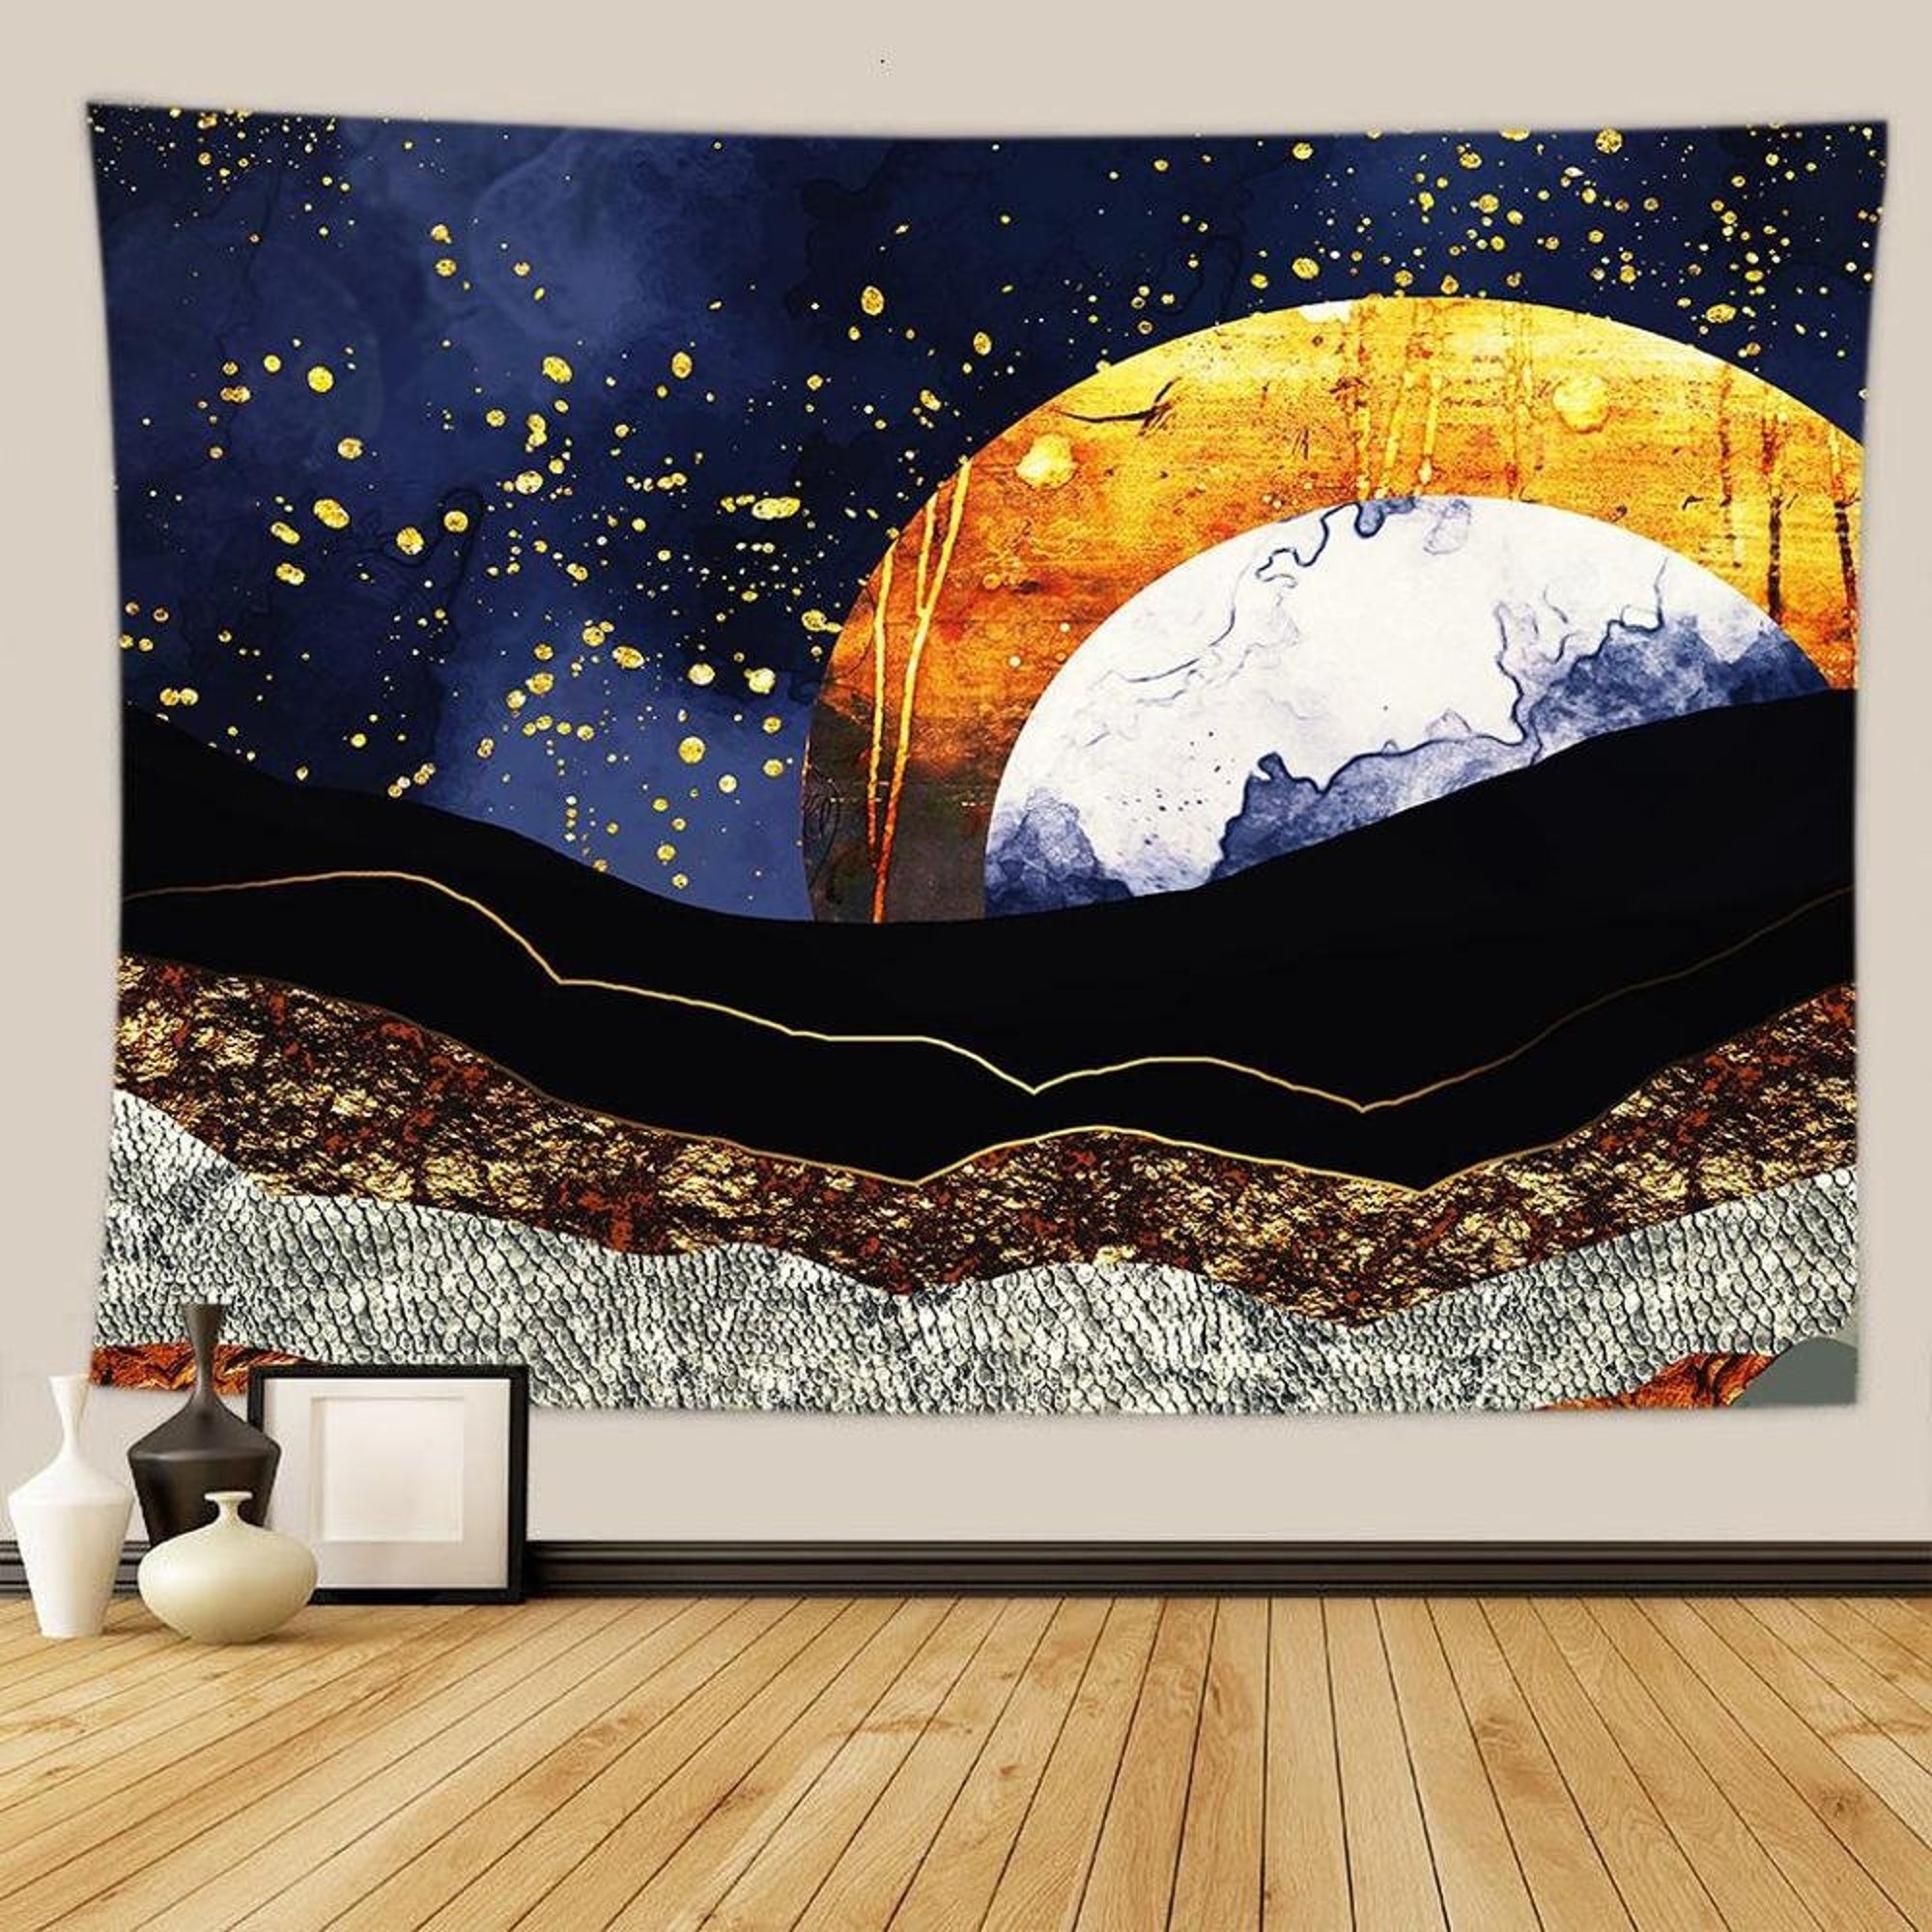 Nordic Tapestry, Landscape Scenery Wall Tapestry, Abstract Art Wall Hanging, Sun Moon Mandala Tapestries Wall Decor